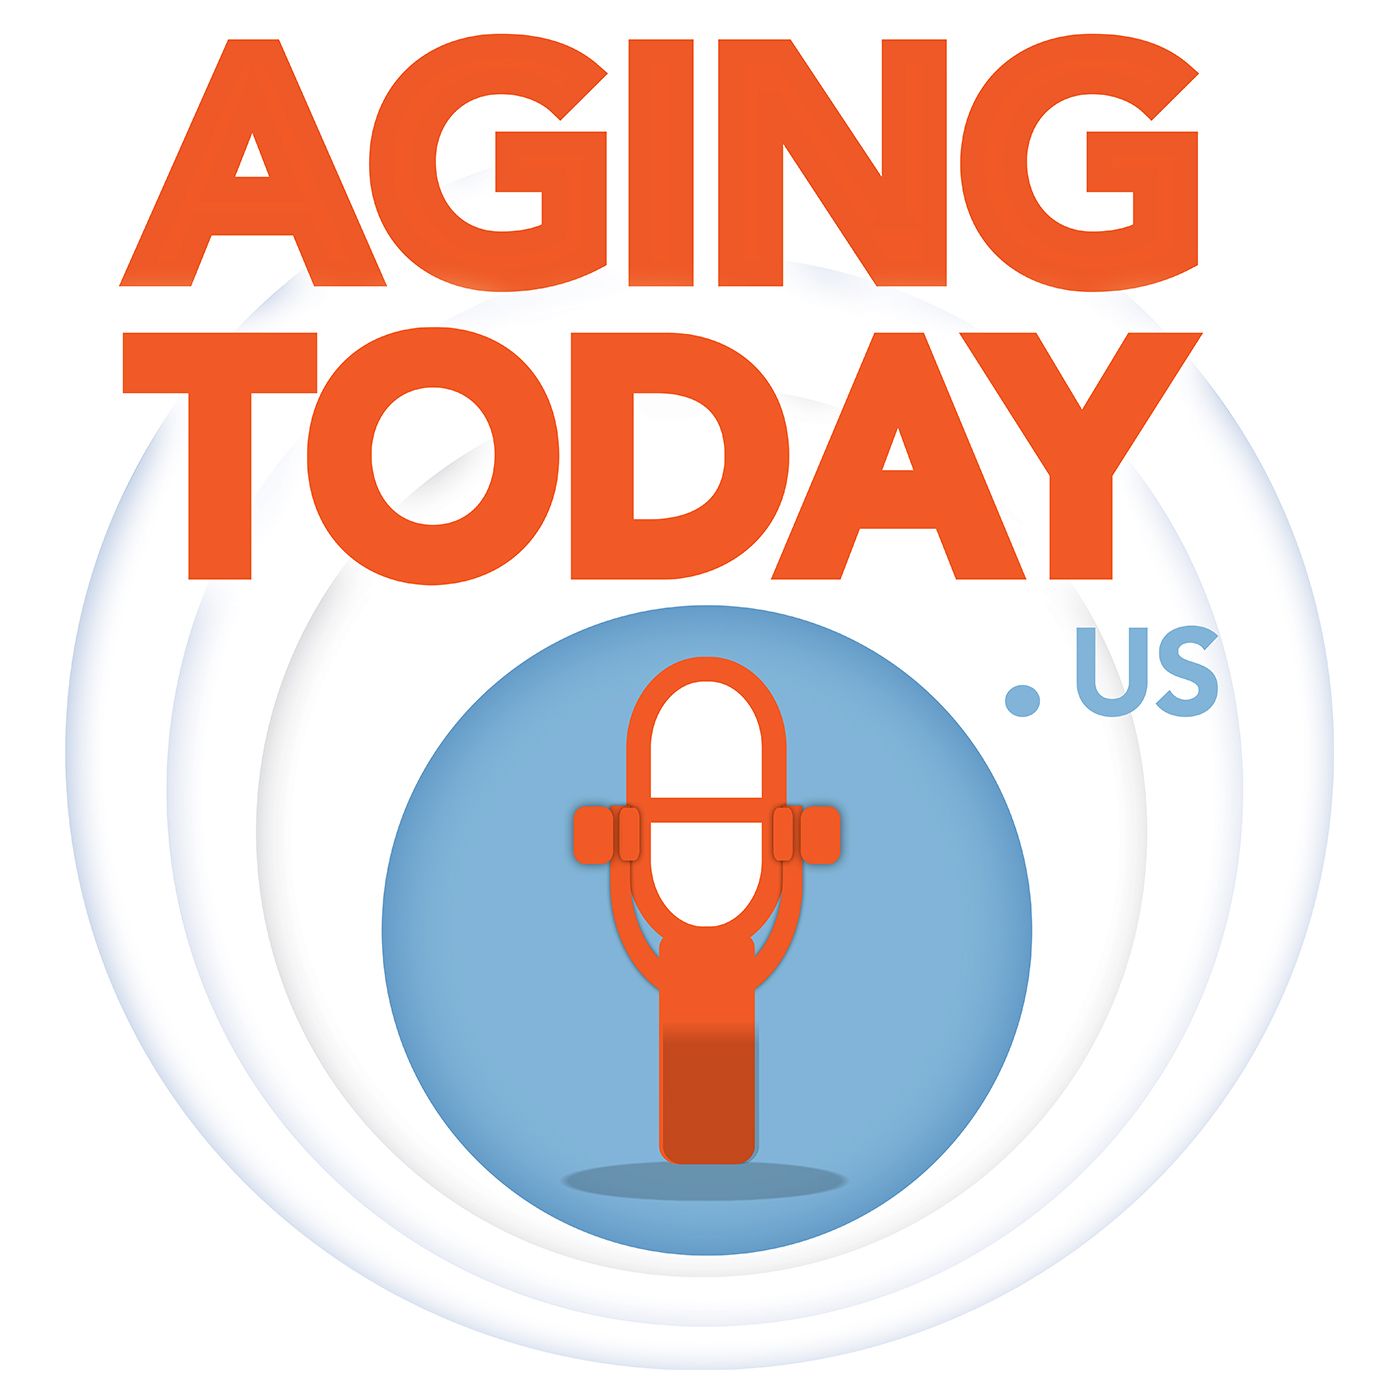 Aging in Portland | Radio Show and Podcast